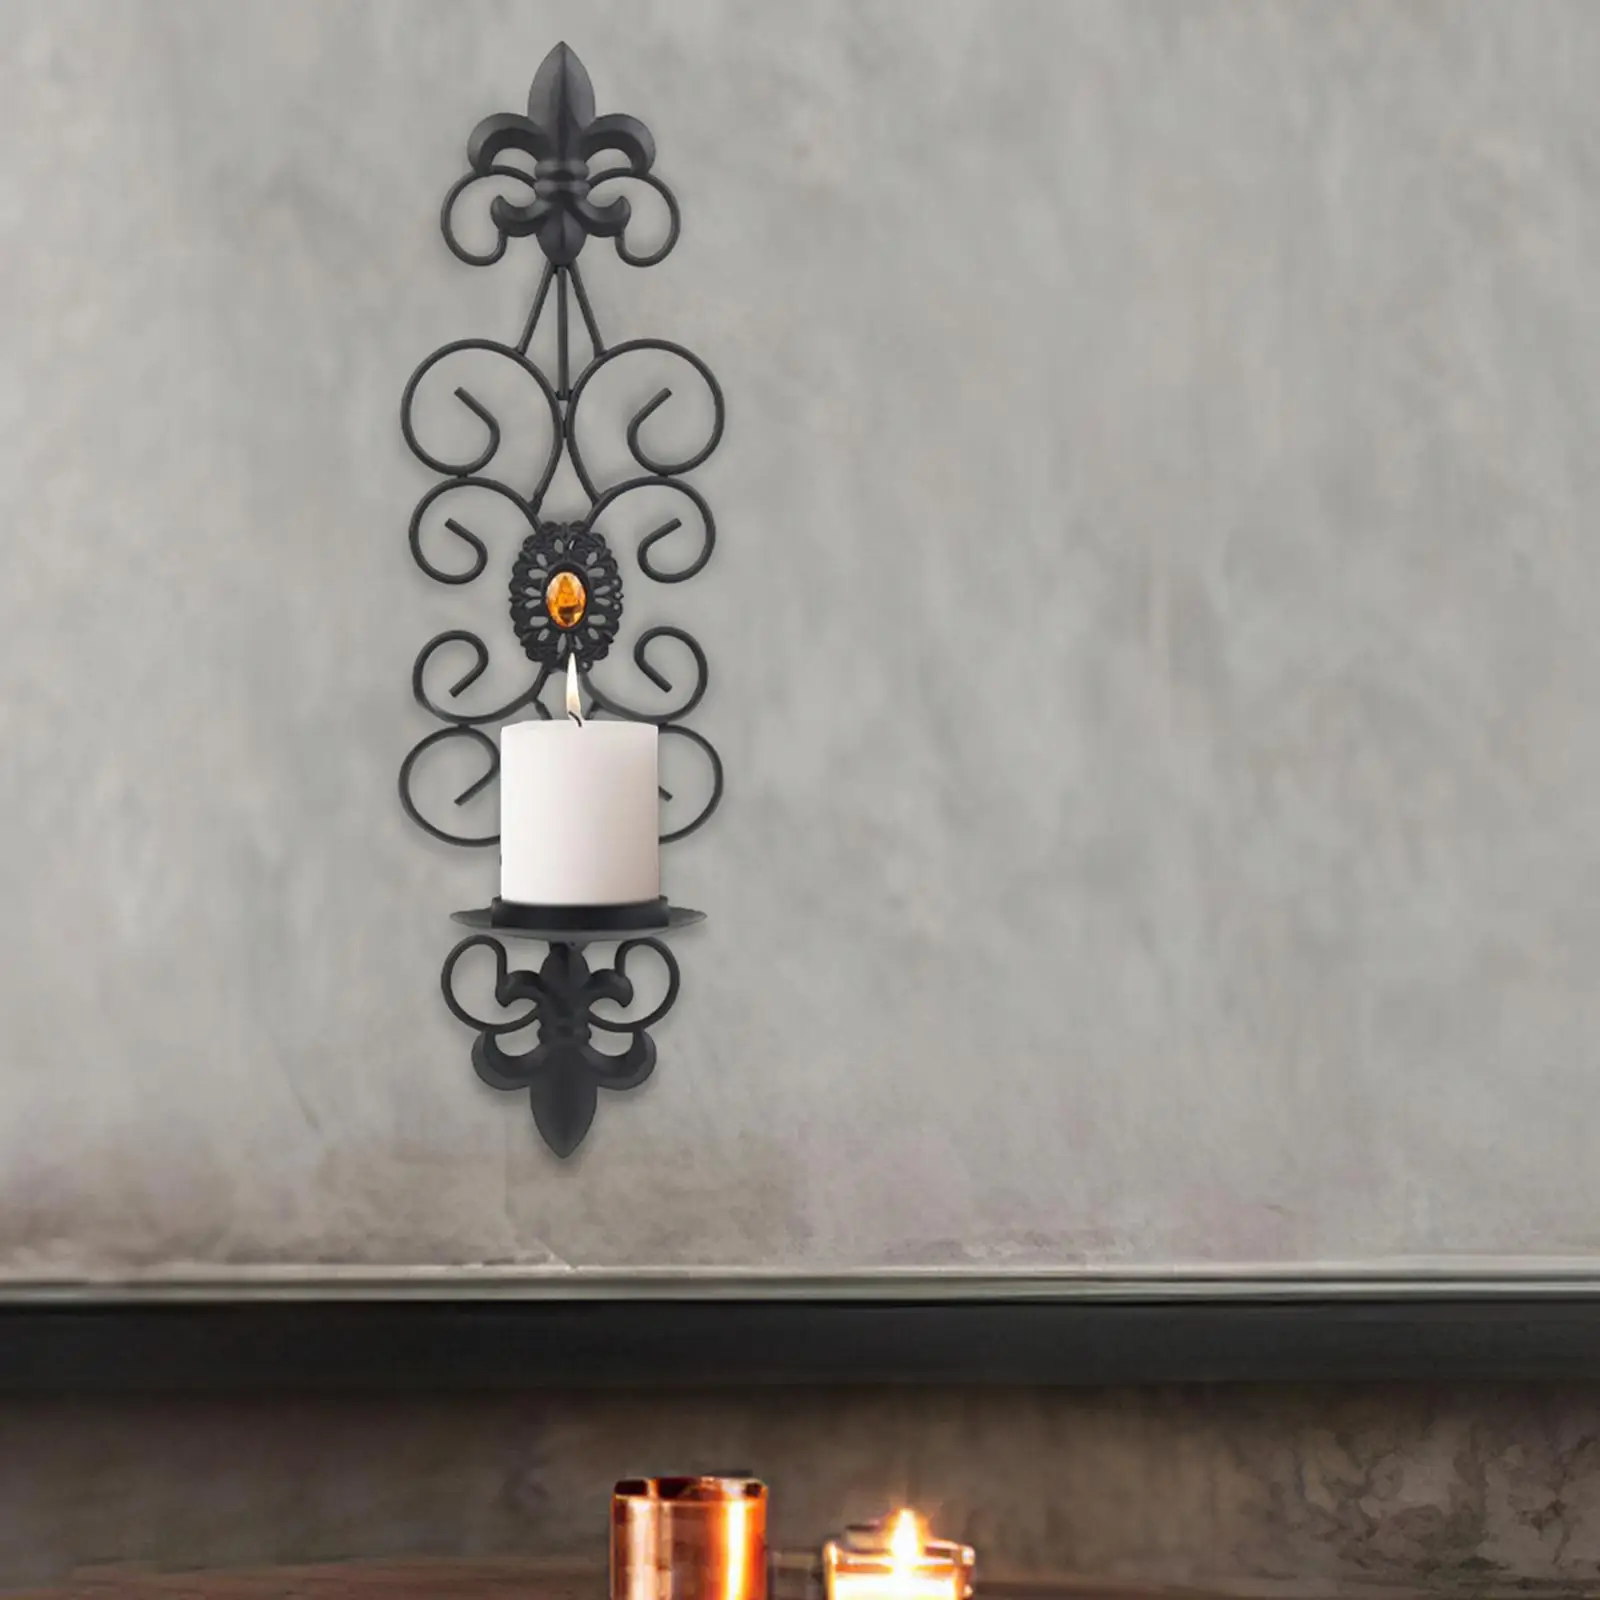 Hanging Tealight Candle Holders Wall Hanging Sculpture Antique Candlestick Stand Pillar Candle Holder for Living Room Home Decor